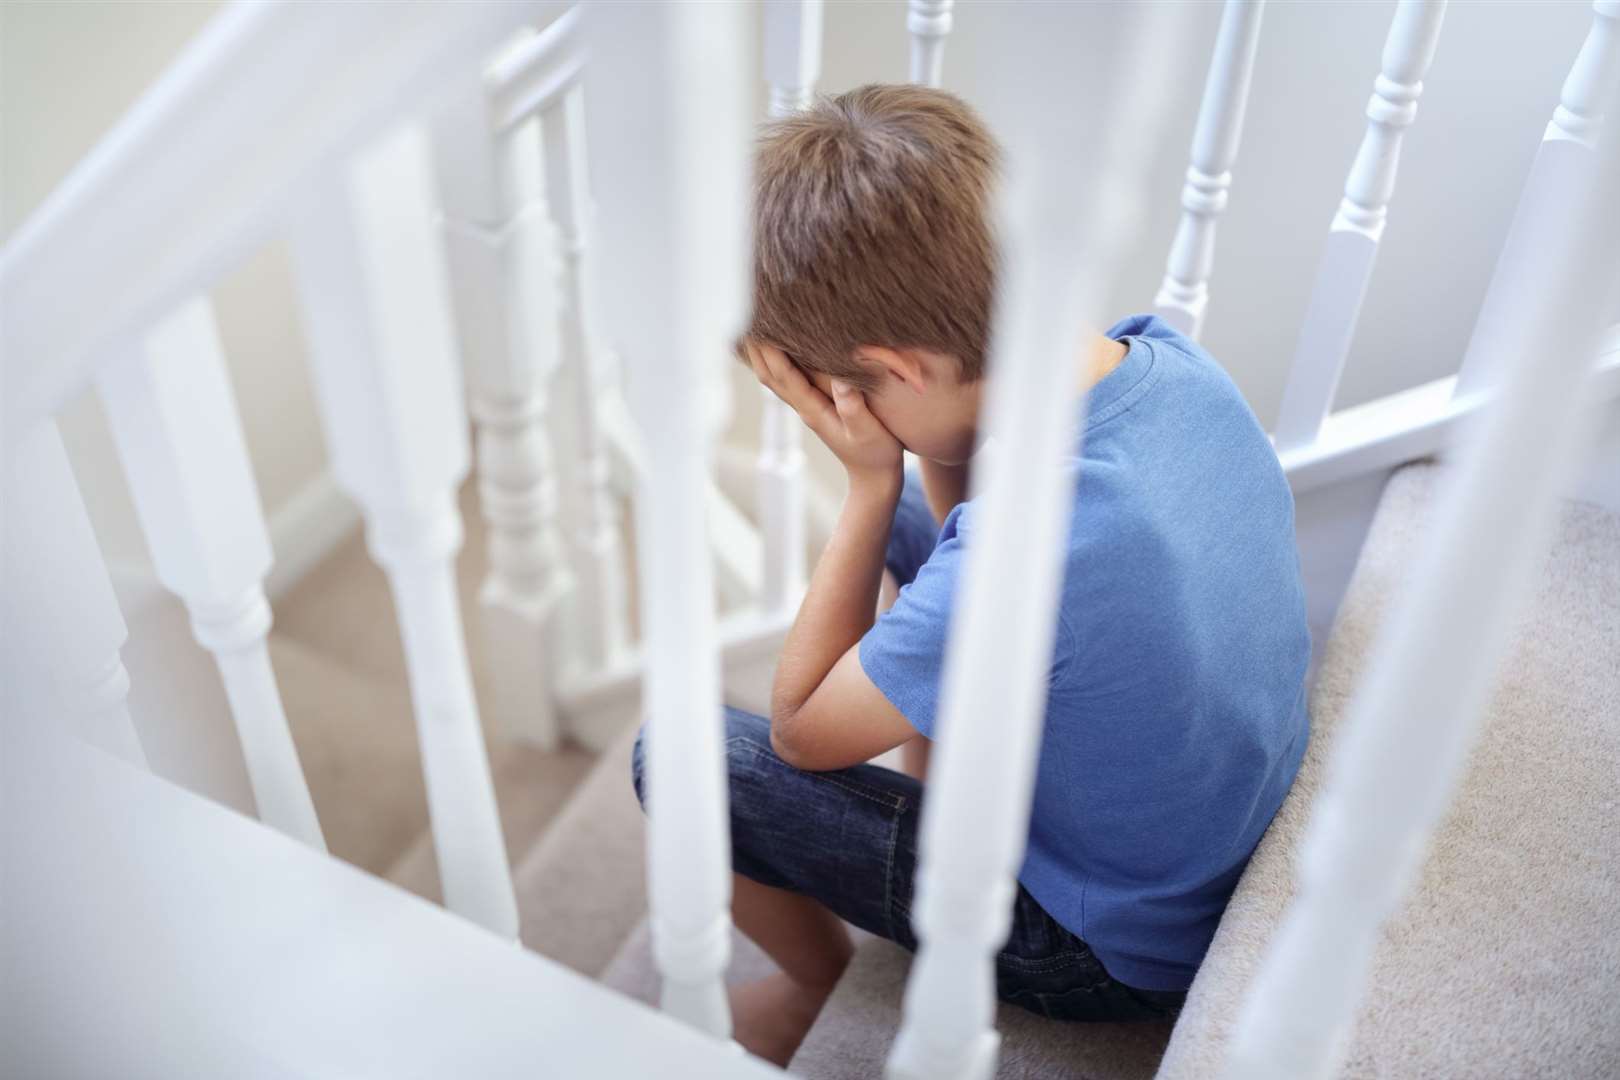 Children are struggling with everything that's going on. Photo: Getty Images/iStockphoto, BrianAJackson